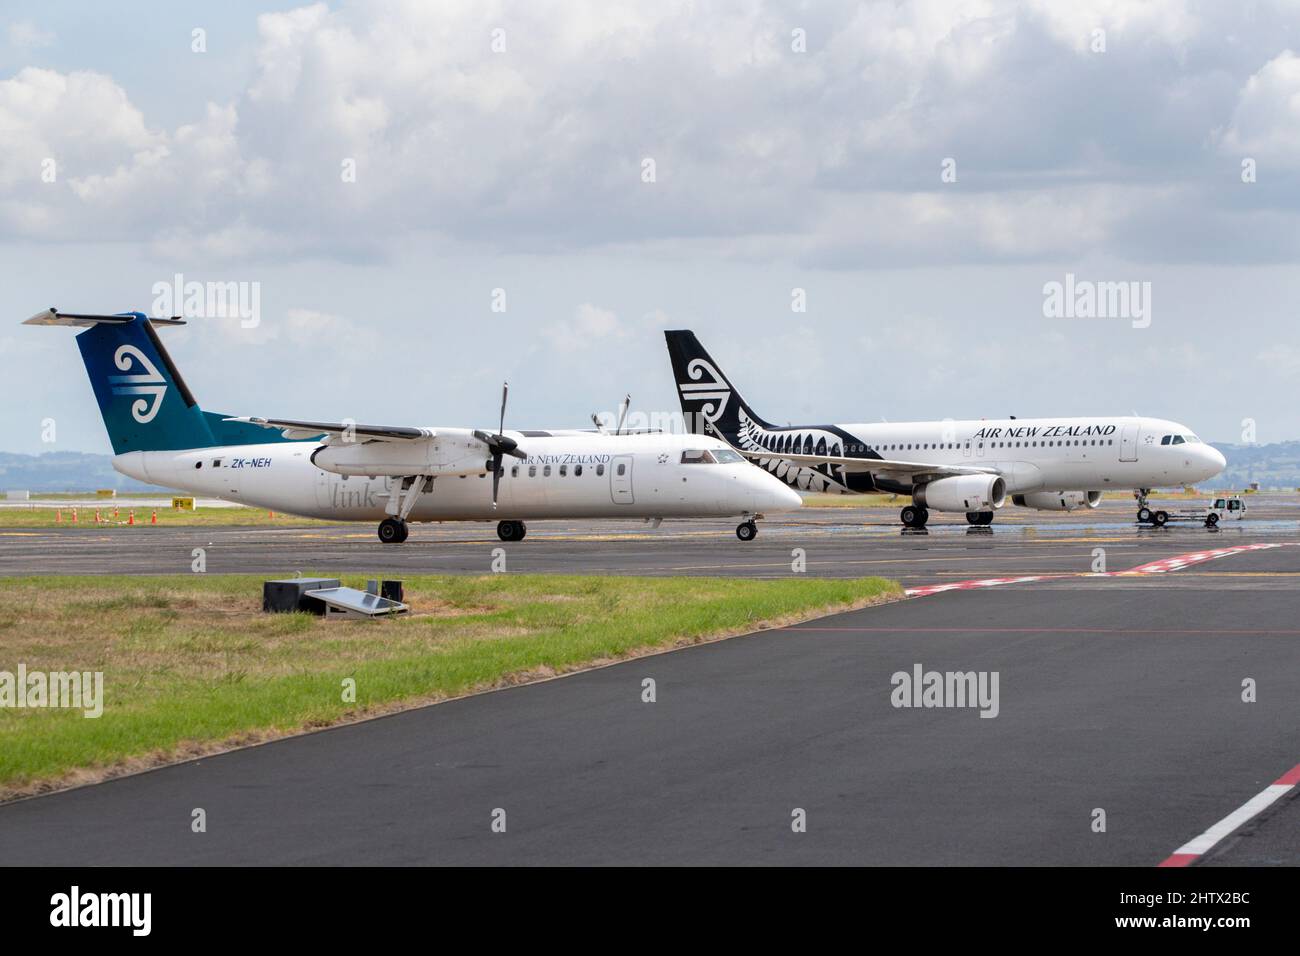 Air New Zealand aircraft at Auckland Airport, New Zealand on Monday, February 28, 2022. Stock Photo